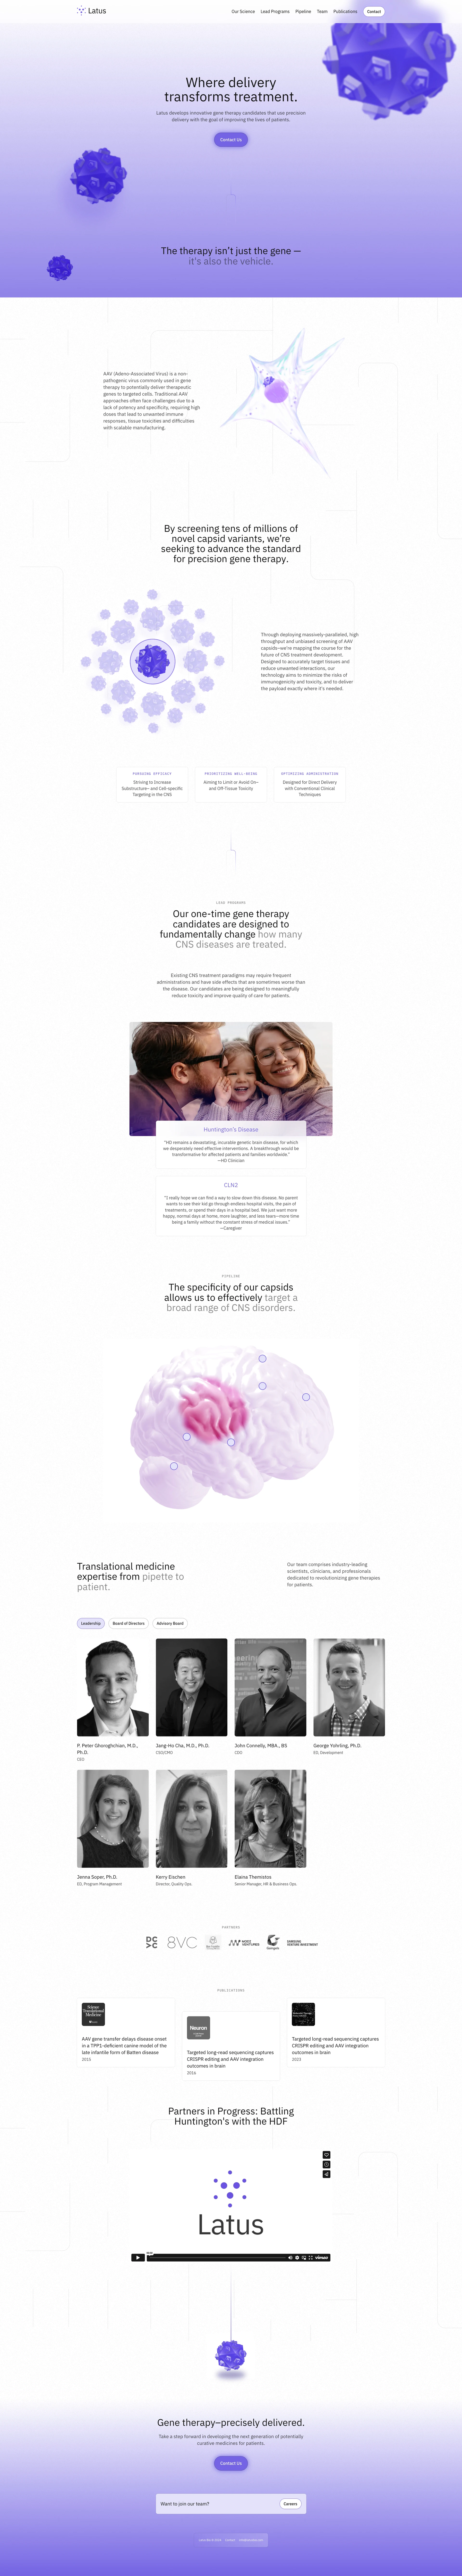 Latus Landing Page Example: Where delivery transforms treatment. Latus develops innovative gene therapy candidates that use precision delivery with the goal of improving the lives of patients.